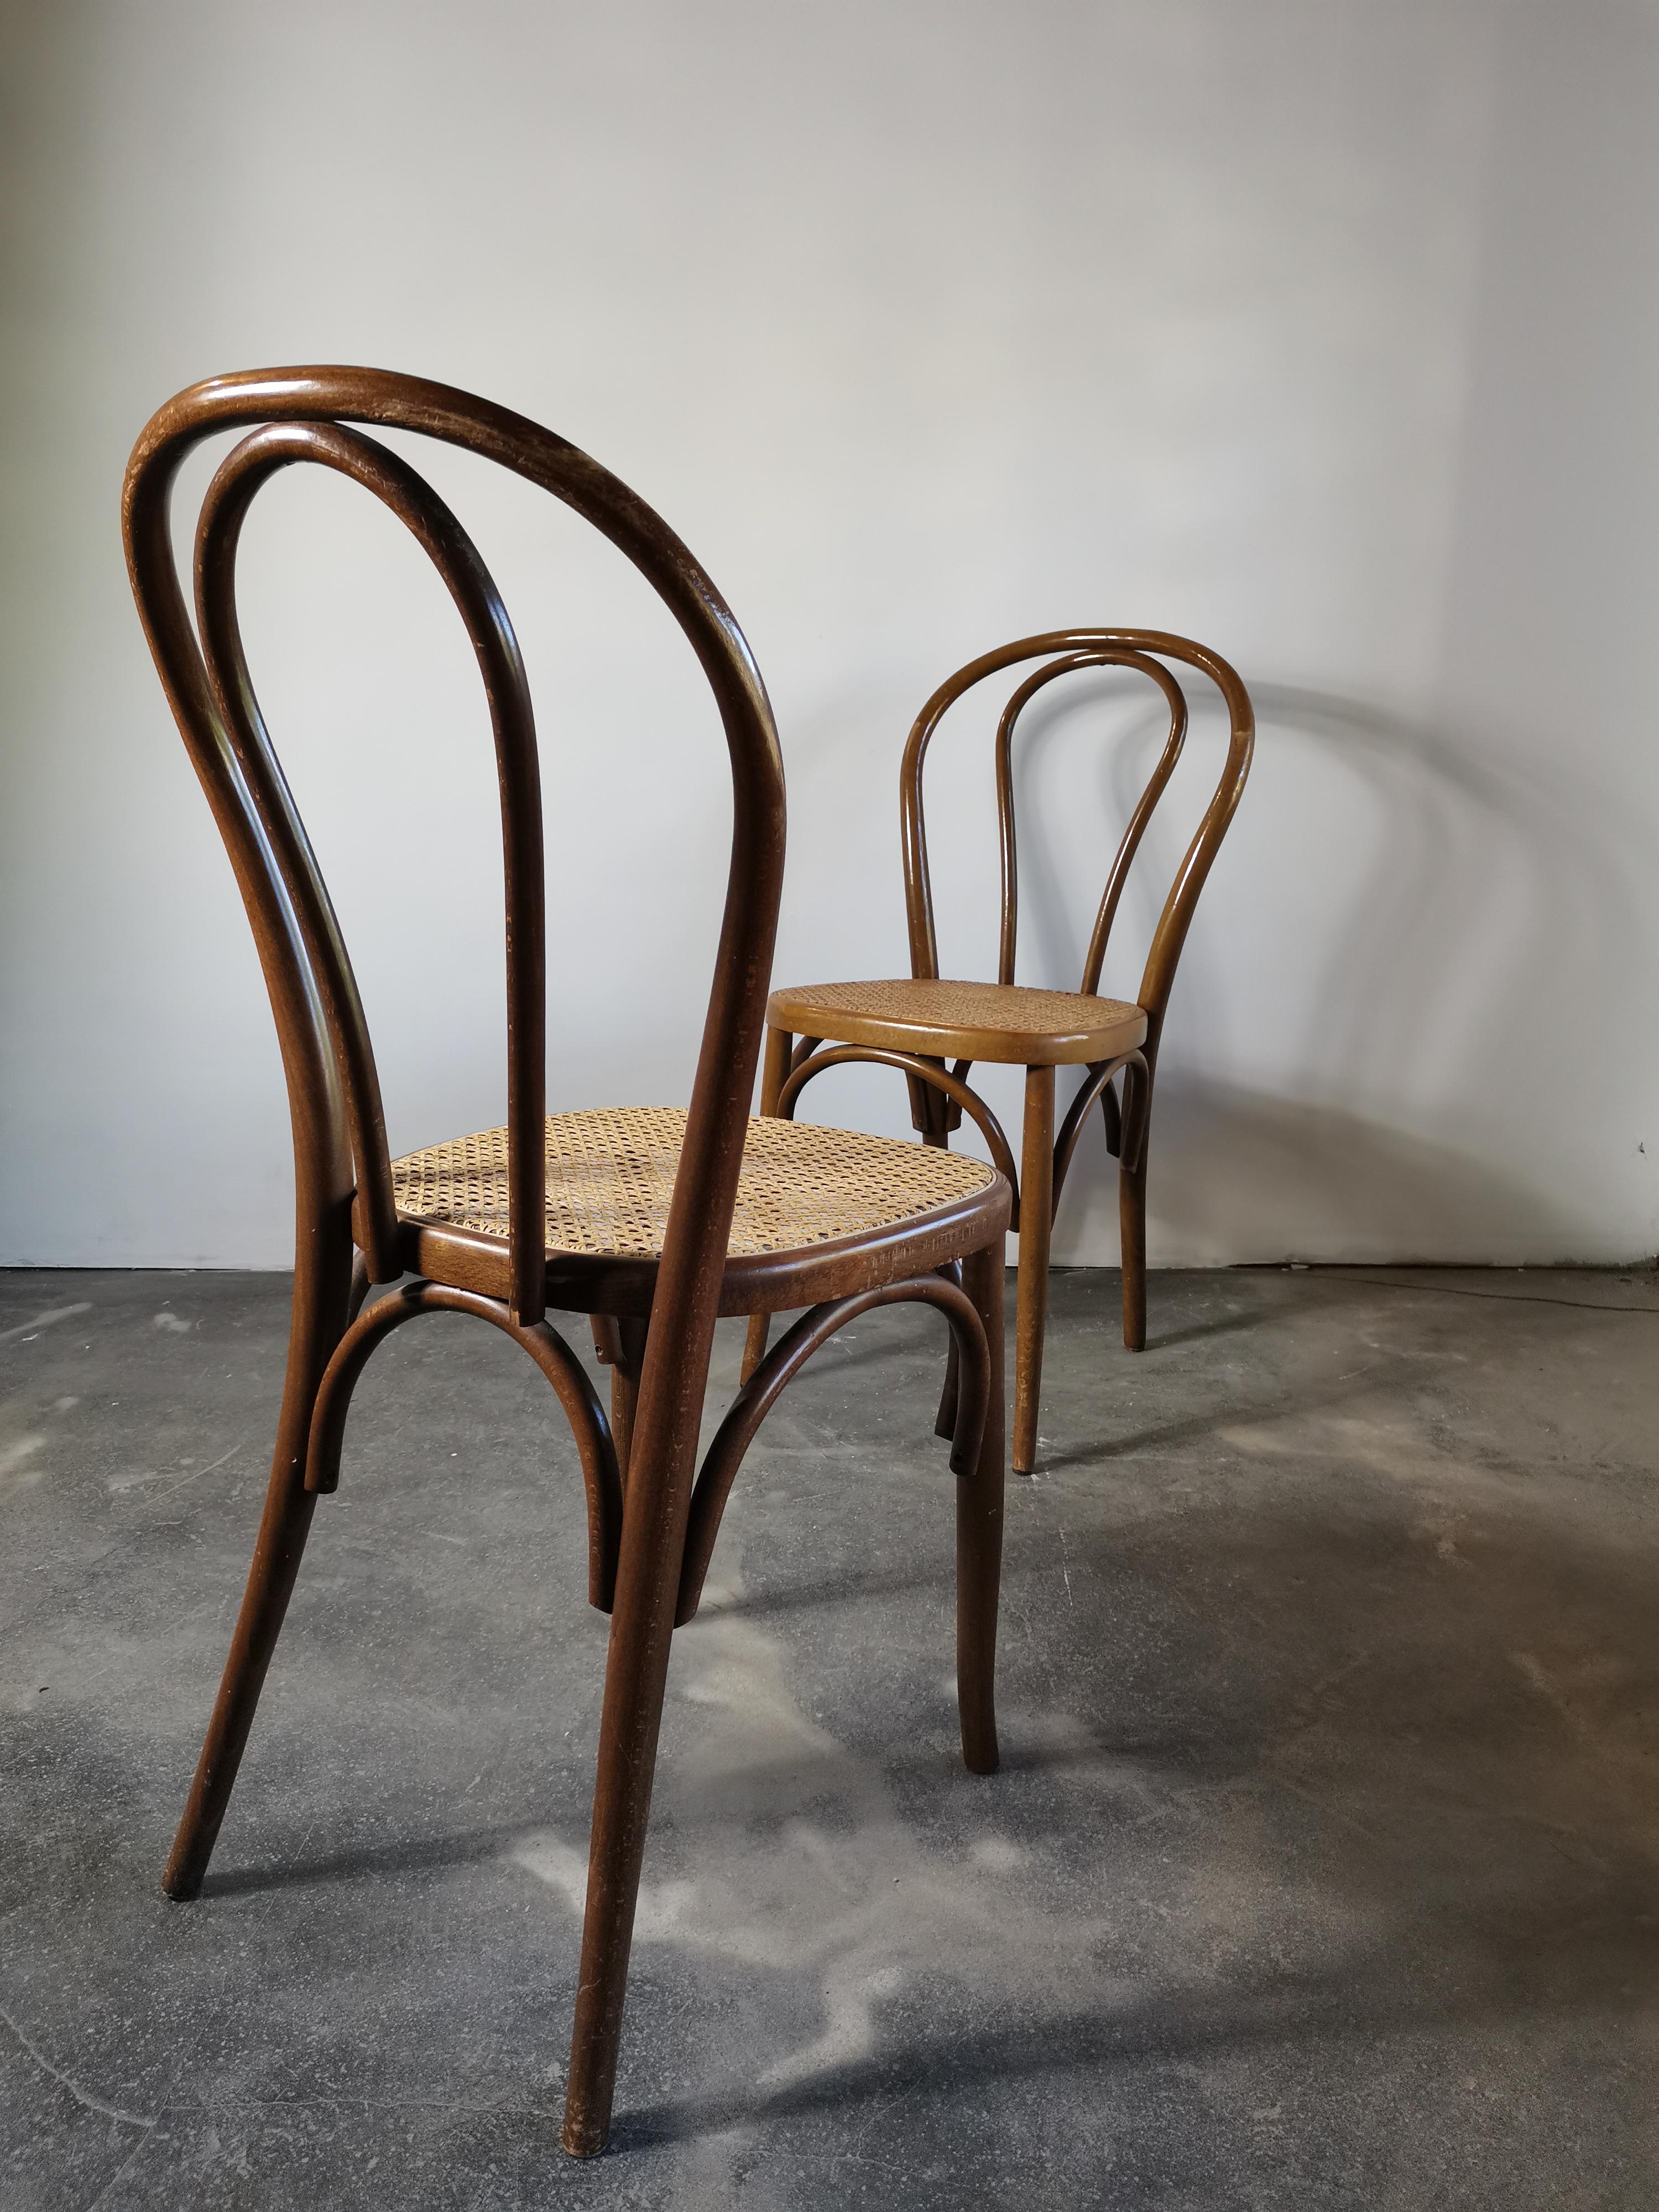 Chair, Thonet Style, Bentwood, Cane - beautiful patina 

Price is for one chair.

Period: 1960s

Materials: Bentwood, Cane 

Condition: solid, signs of use, undamaged

Colour: Wood

Dimensions: H = 88cm, W = 41 cm, D = 41 (51) cm, seat height = 47 cm